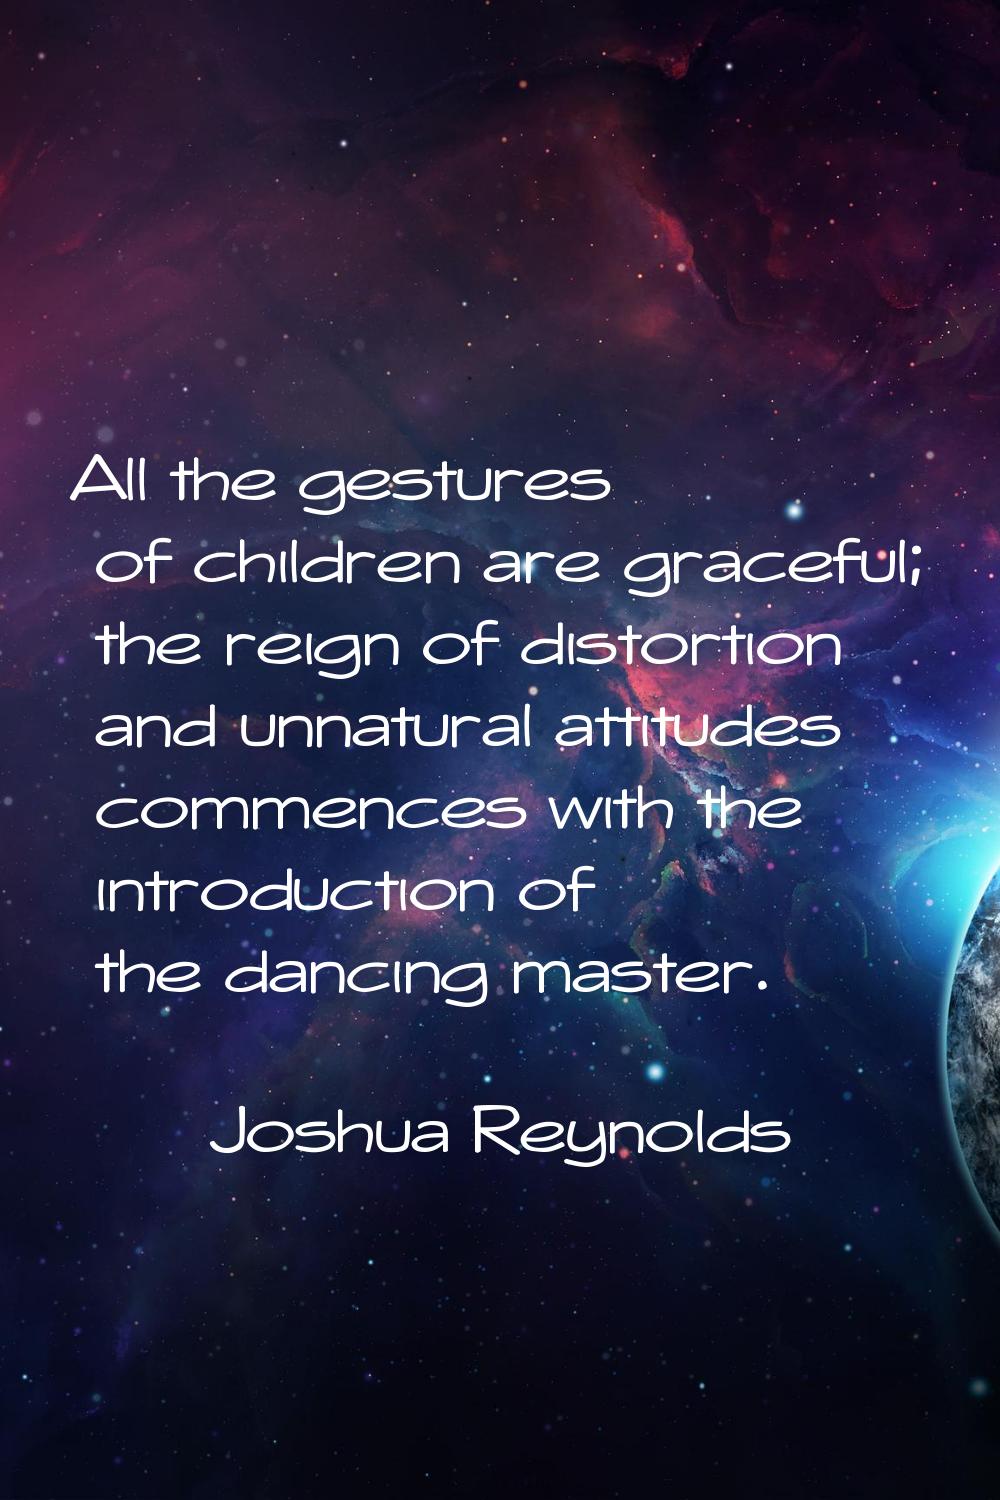 All the gestures of children are graceful; the reign of distortion and unnatural attitudes commence